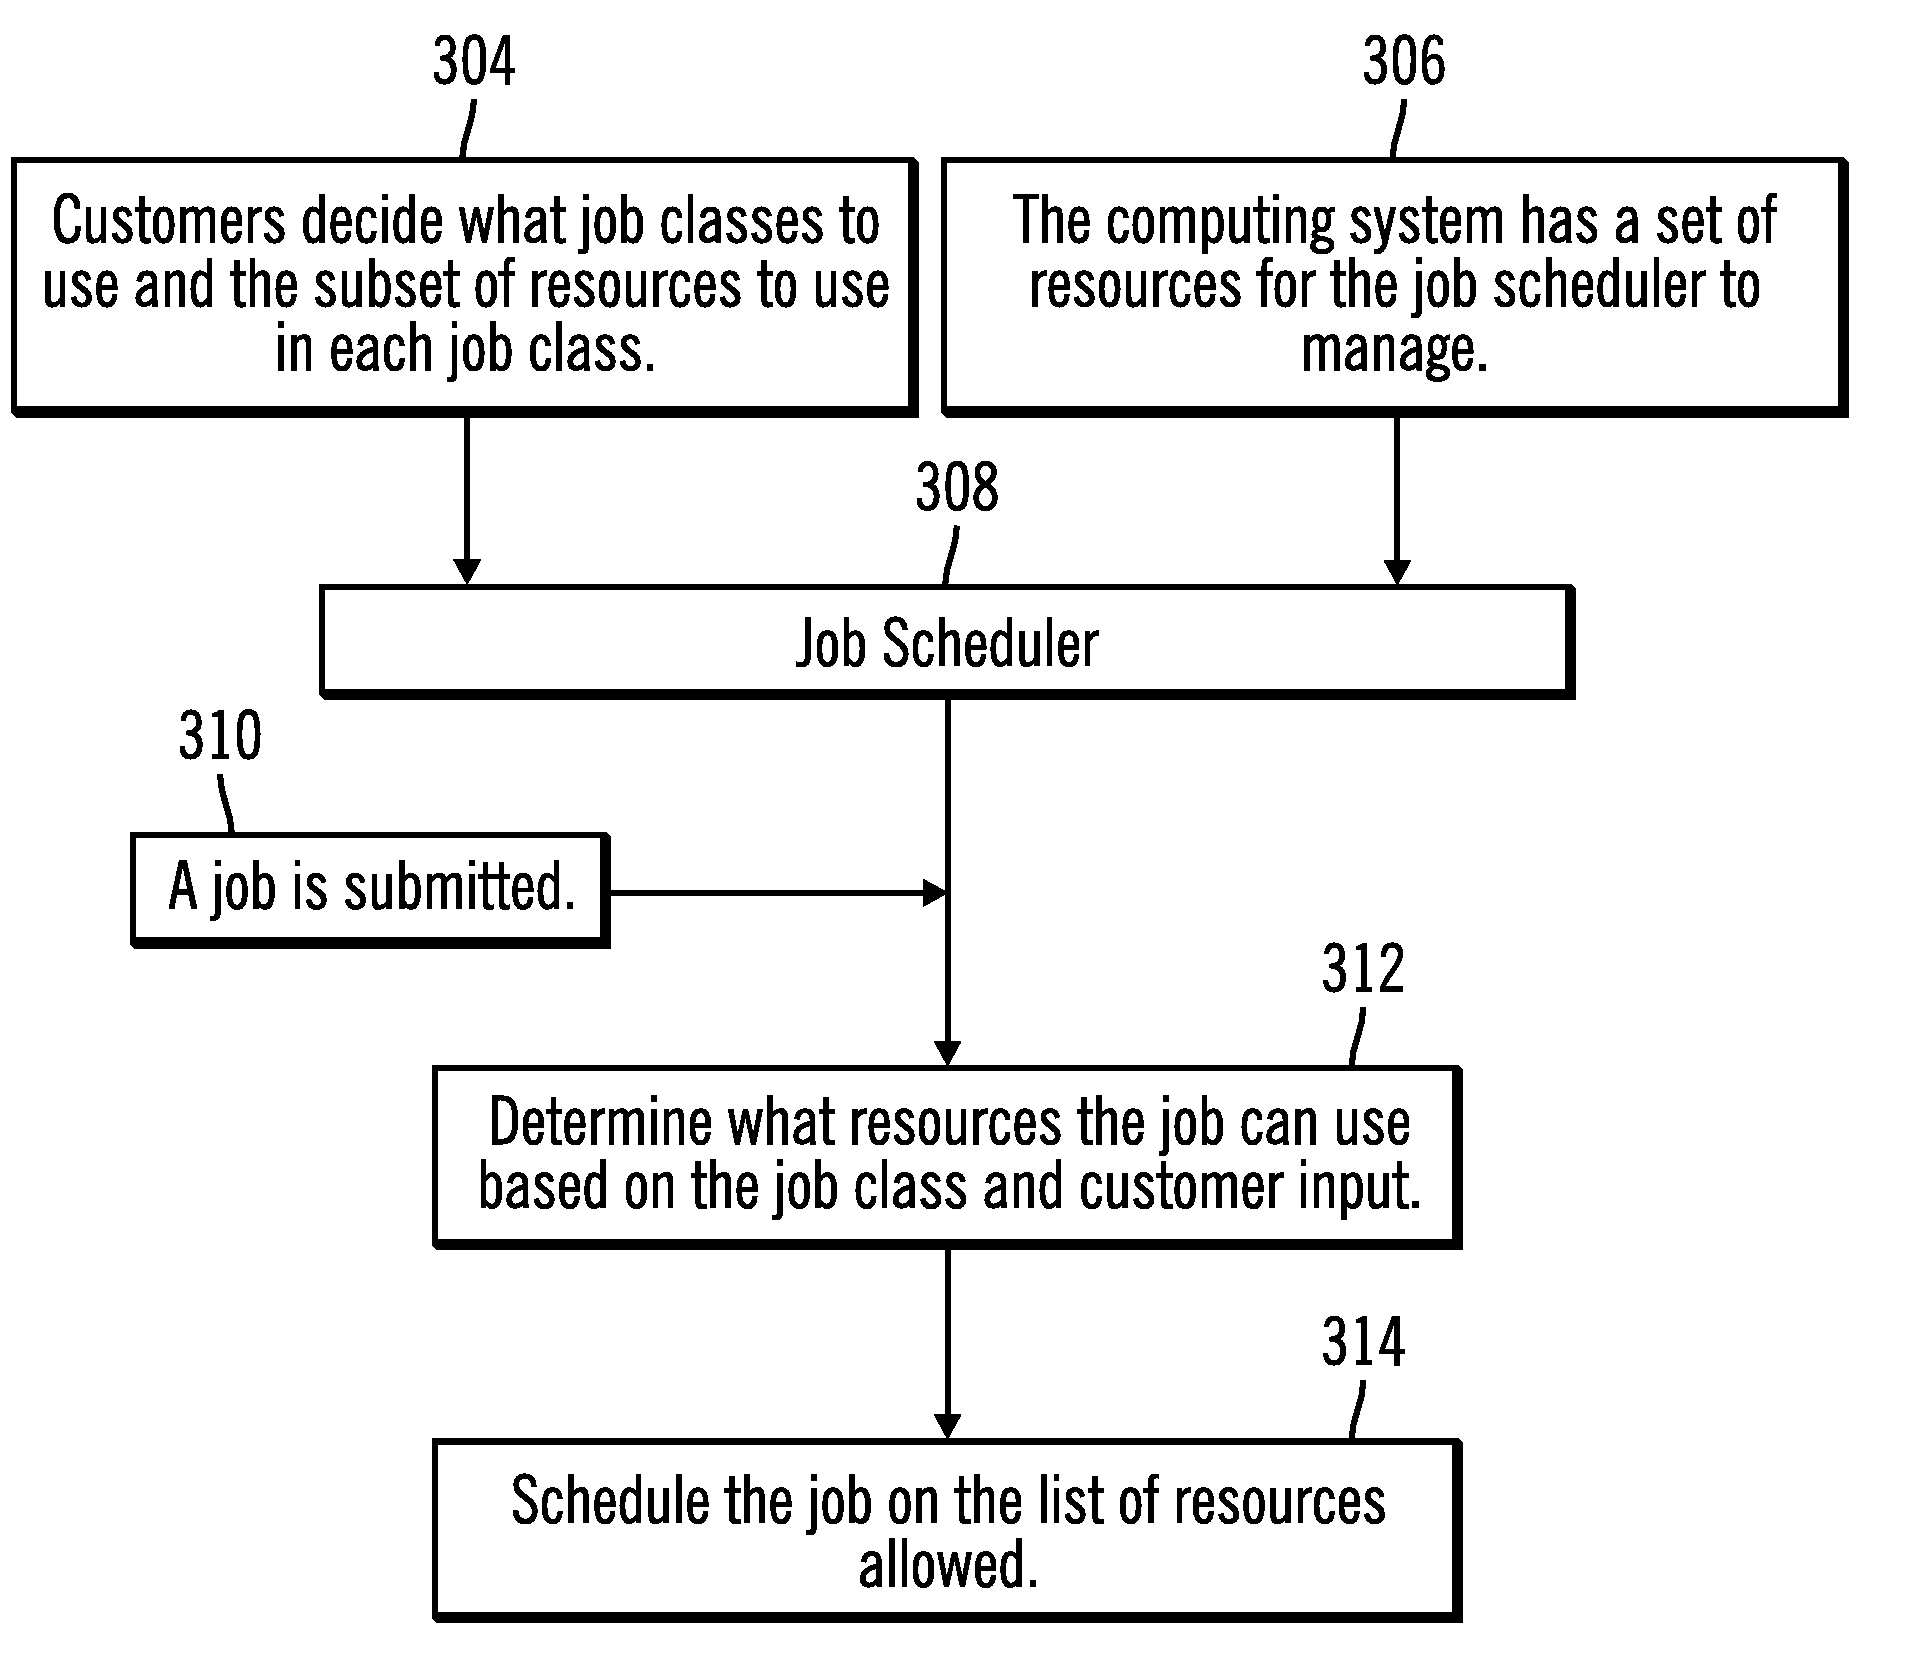 Association and scheduling of jobs using job classes and resource subsets